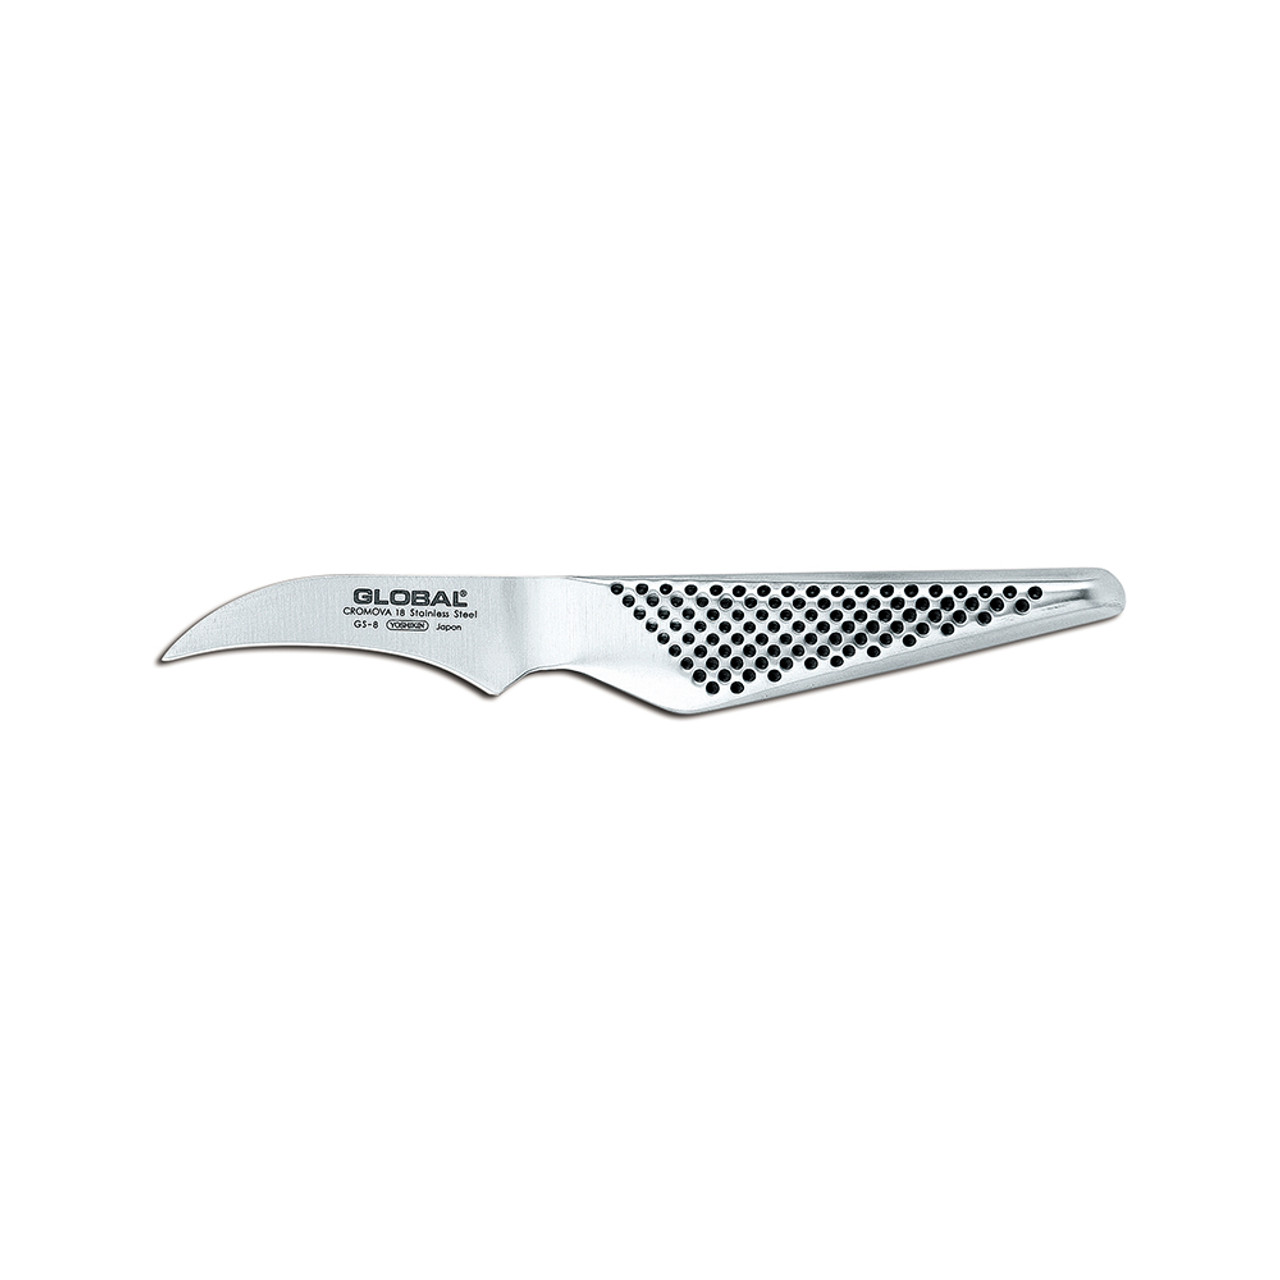 https://cdn11.bigcommerce.com/s-hccytny0od/images/stencil/1280x1280/products/302/4124/global-classic-large-curved-peeler-knife__91710.1514866840.jpg?c=2?imbypass=on